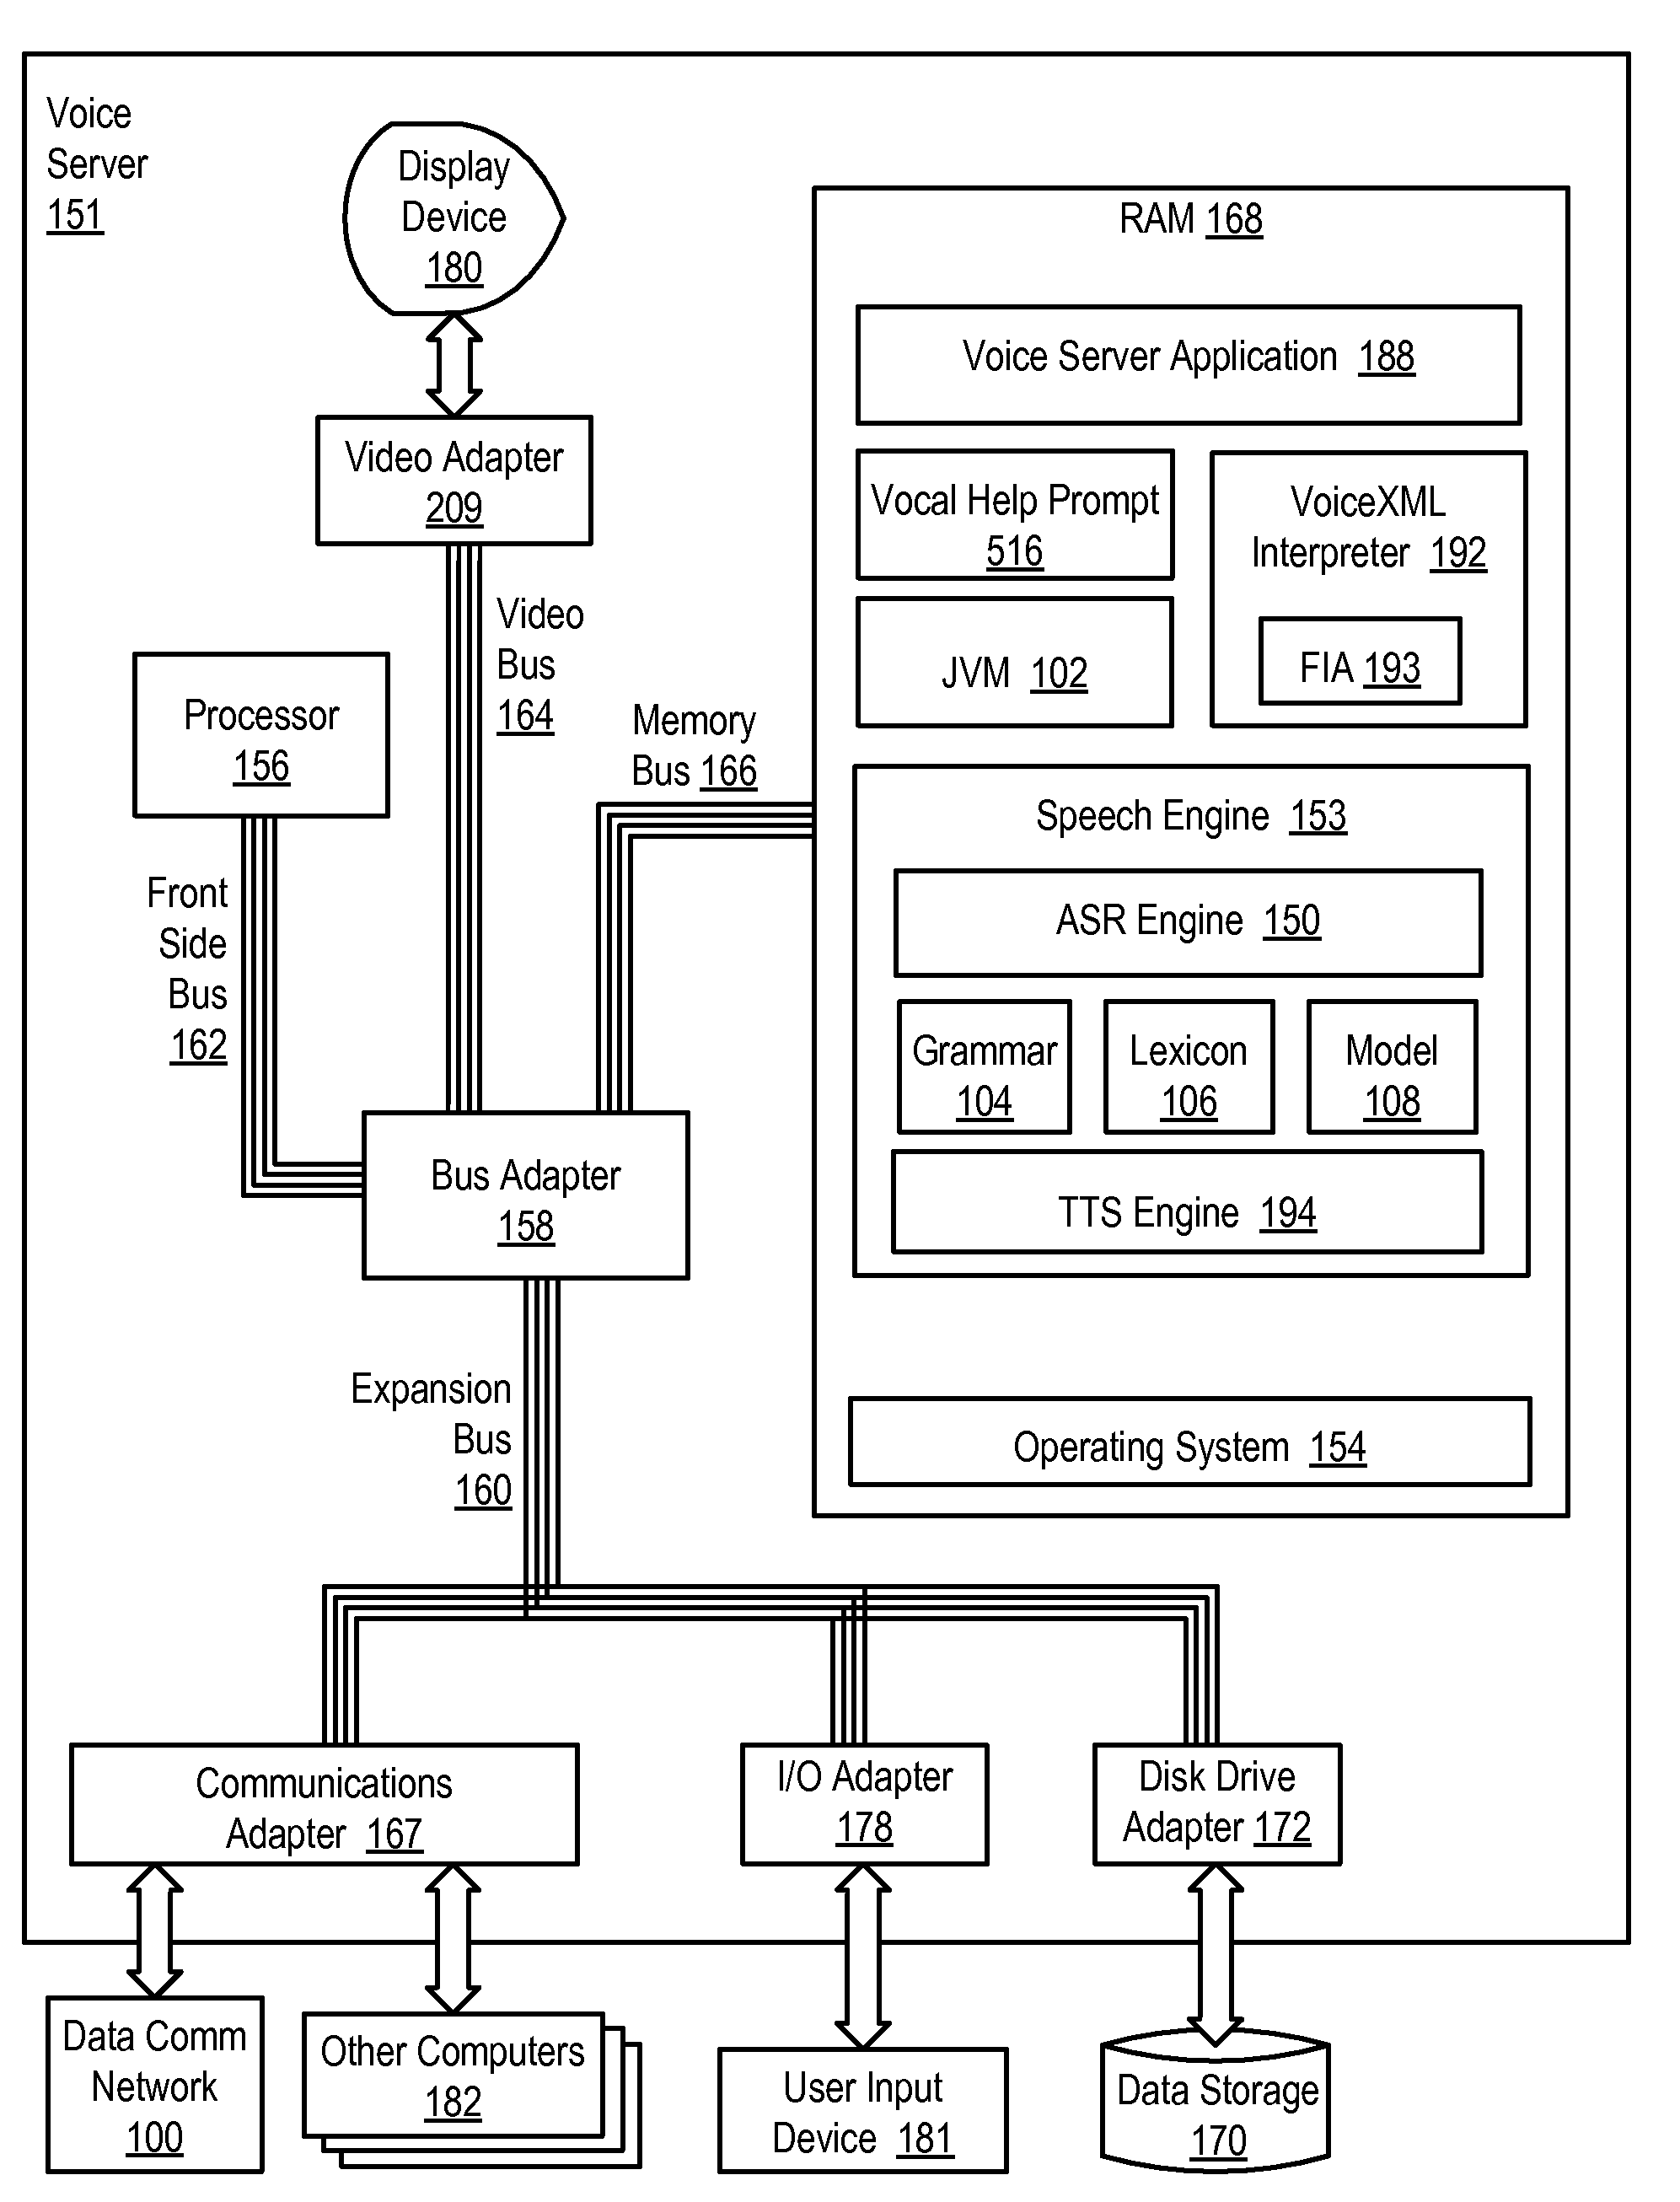 Dynamically Generating a Vocal Help Prompt in a Multimodal Application